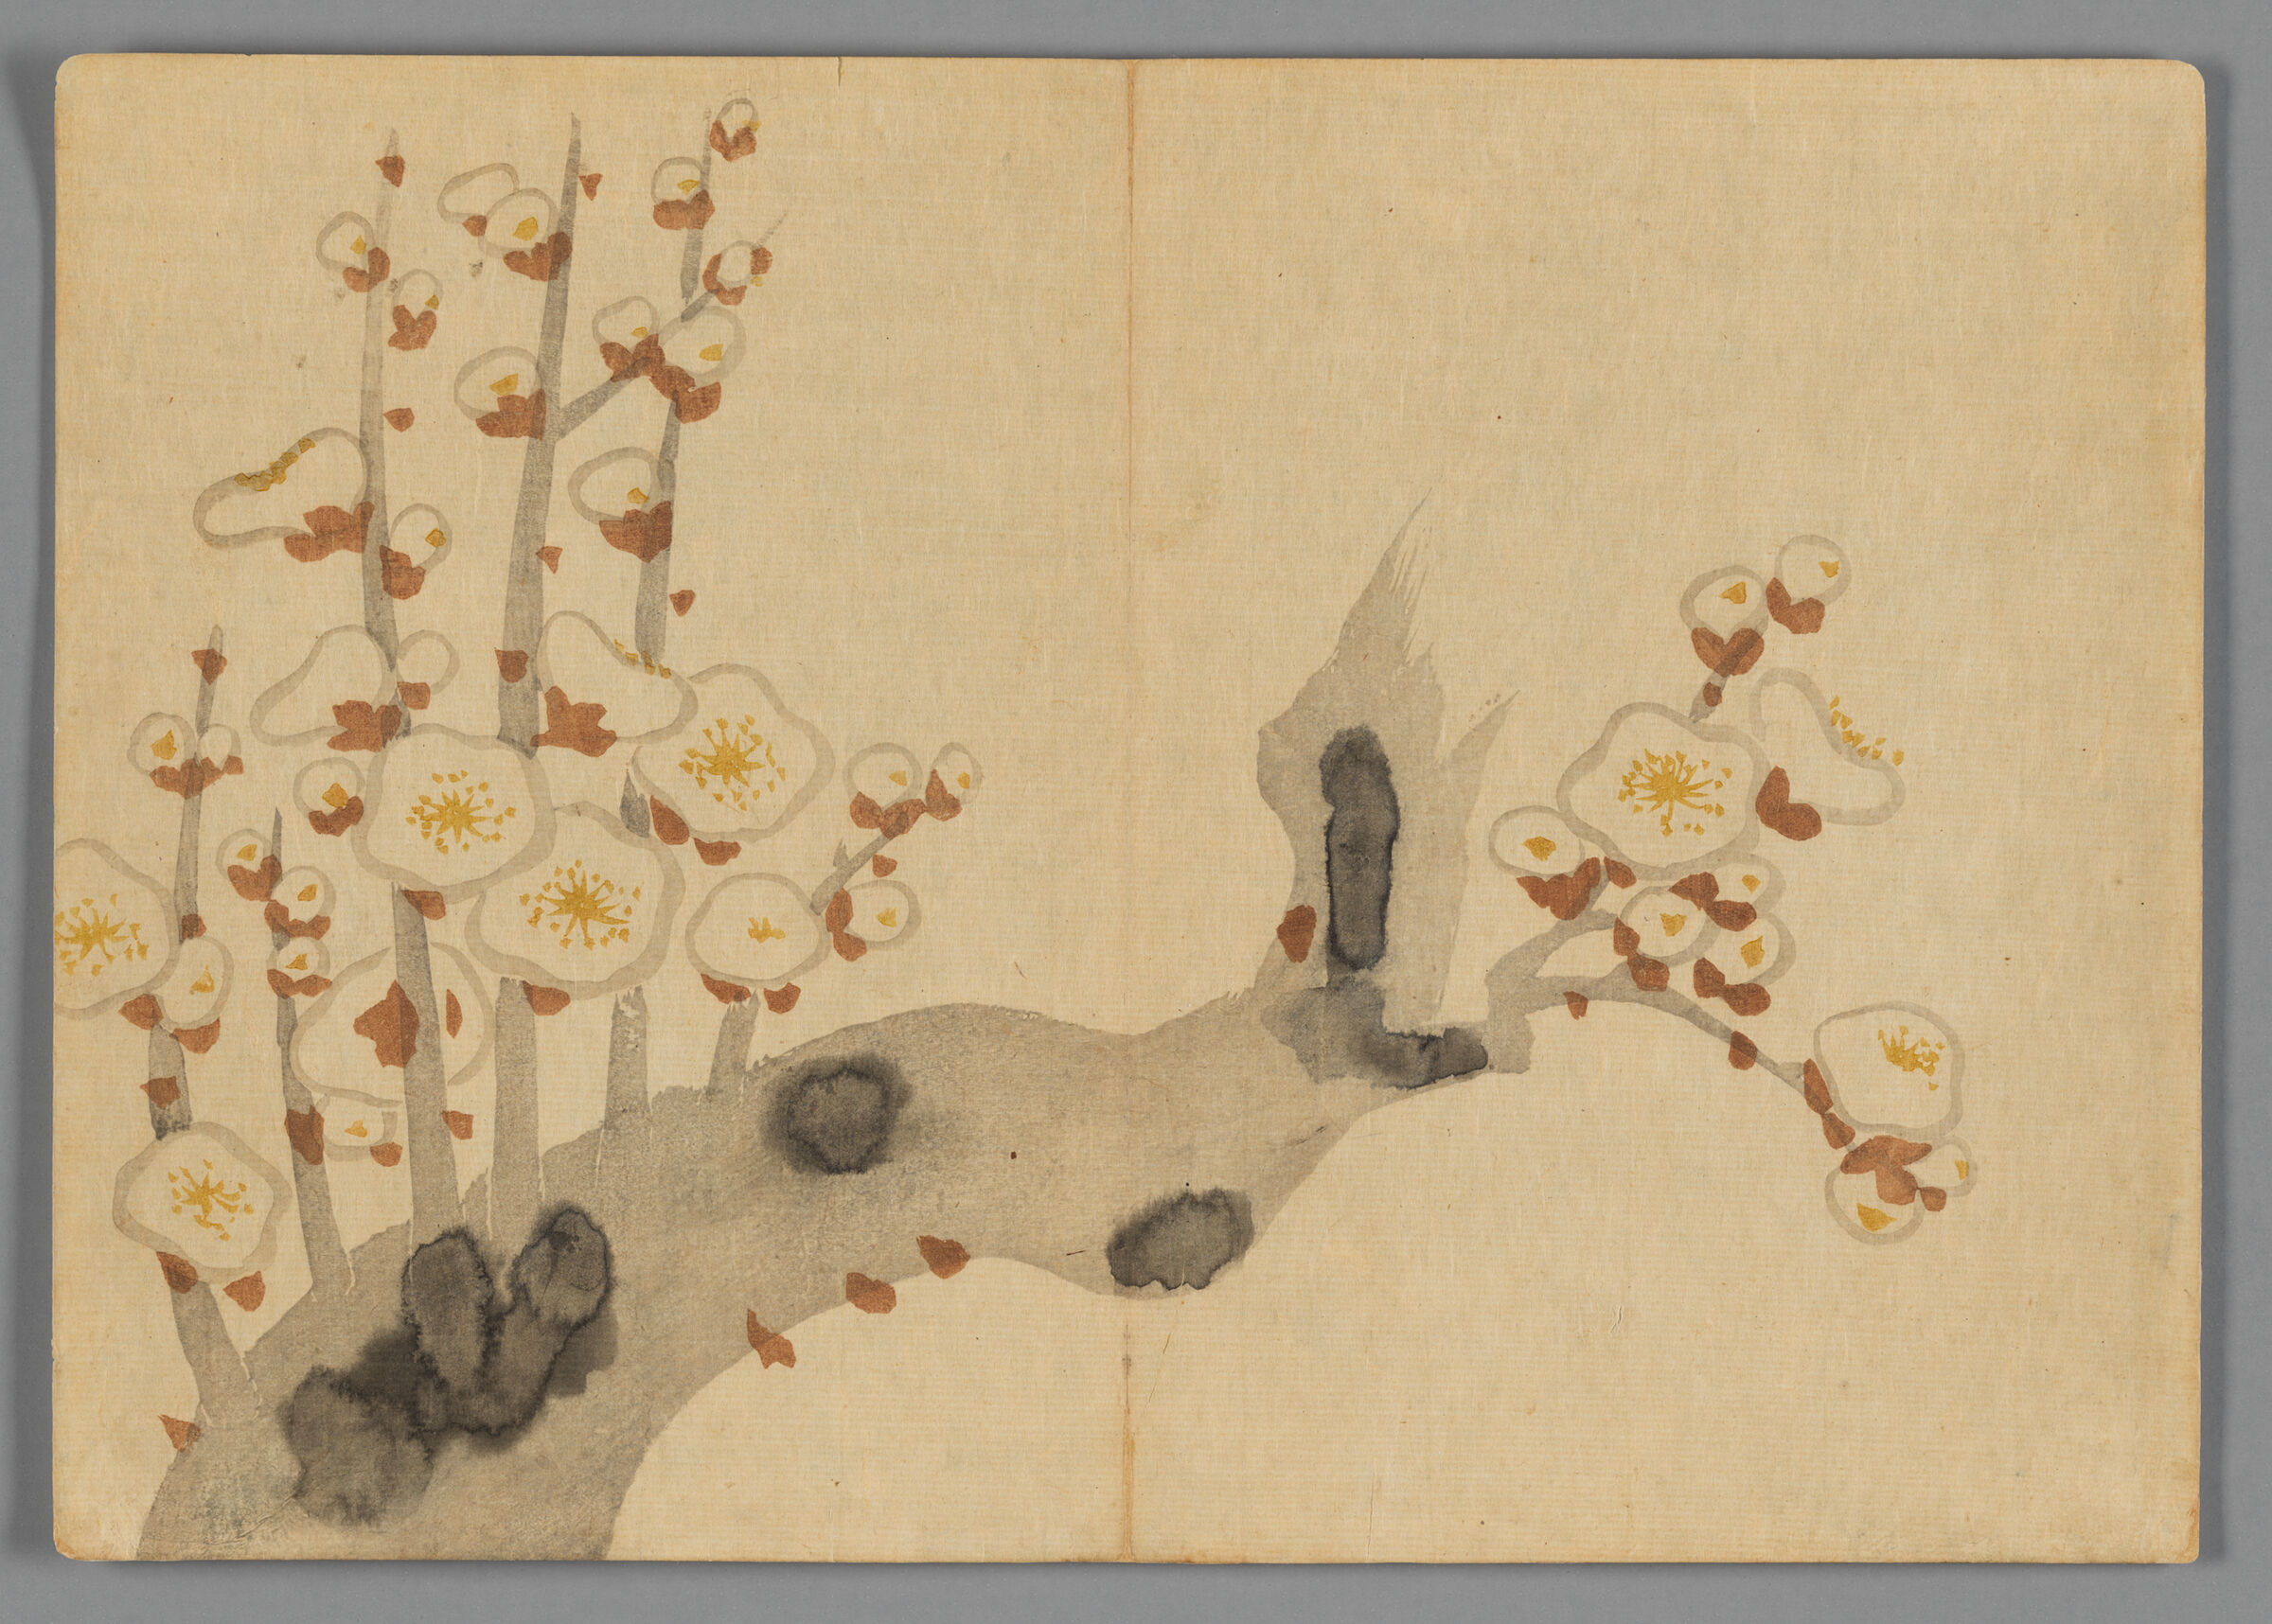 Plum Branch In Blossom, From The Kōrin Gafu (Kōrin Picture Album)